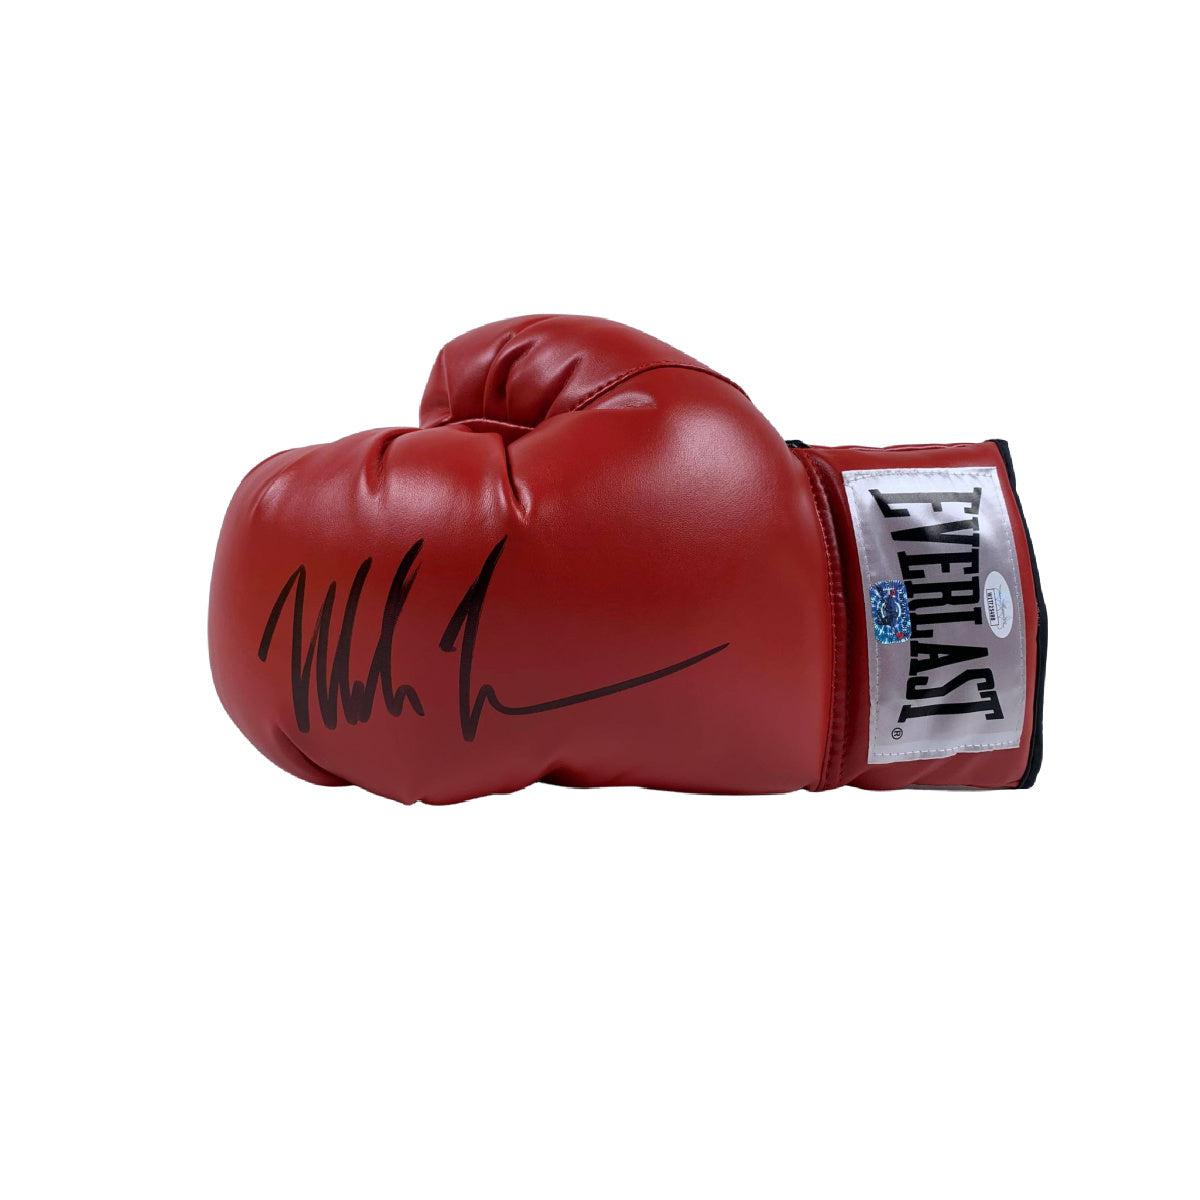 Mike Tyson Signed Everlast Red Boxing Glove Autographed JSA COA